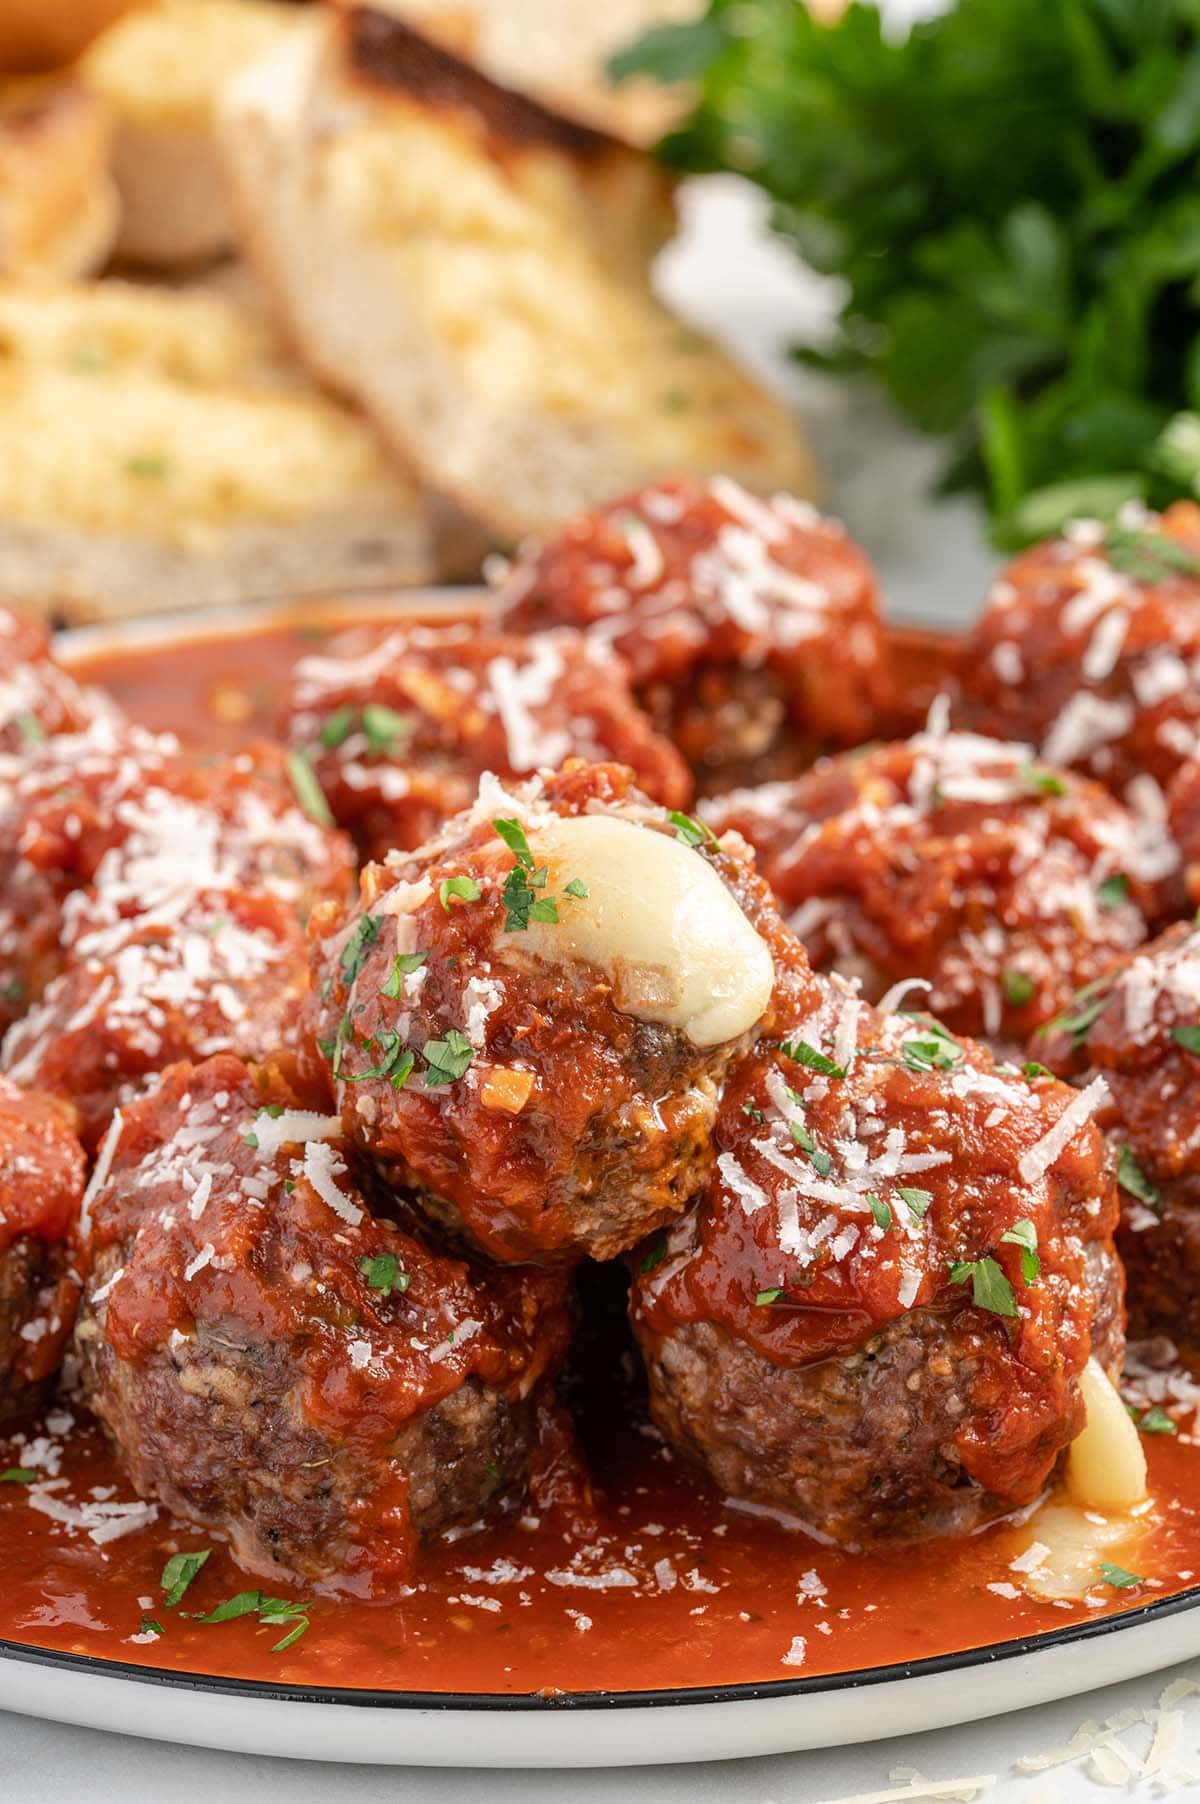 Cheese Stuffed Meatballs on a plate